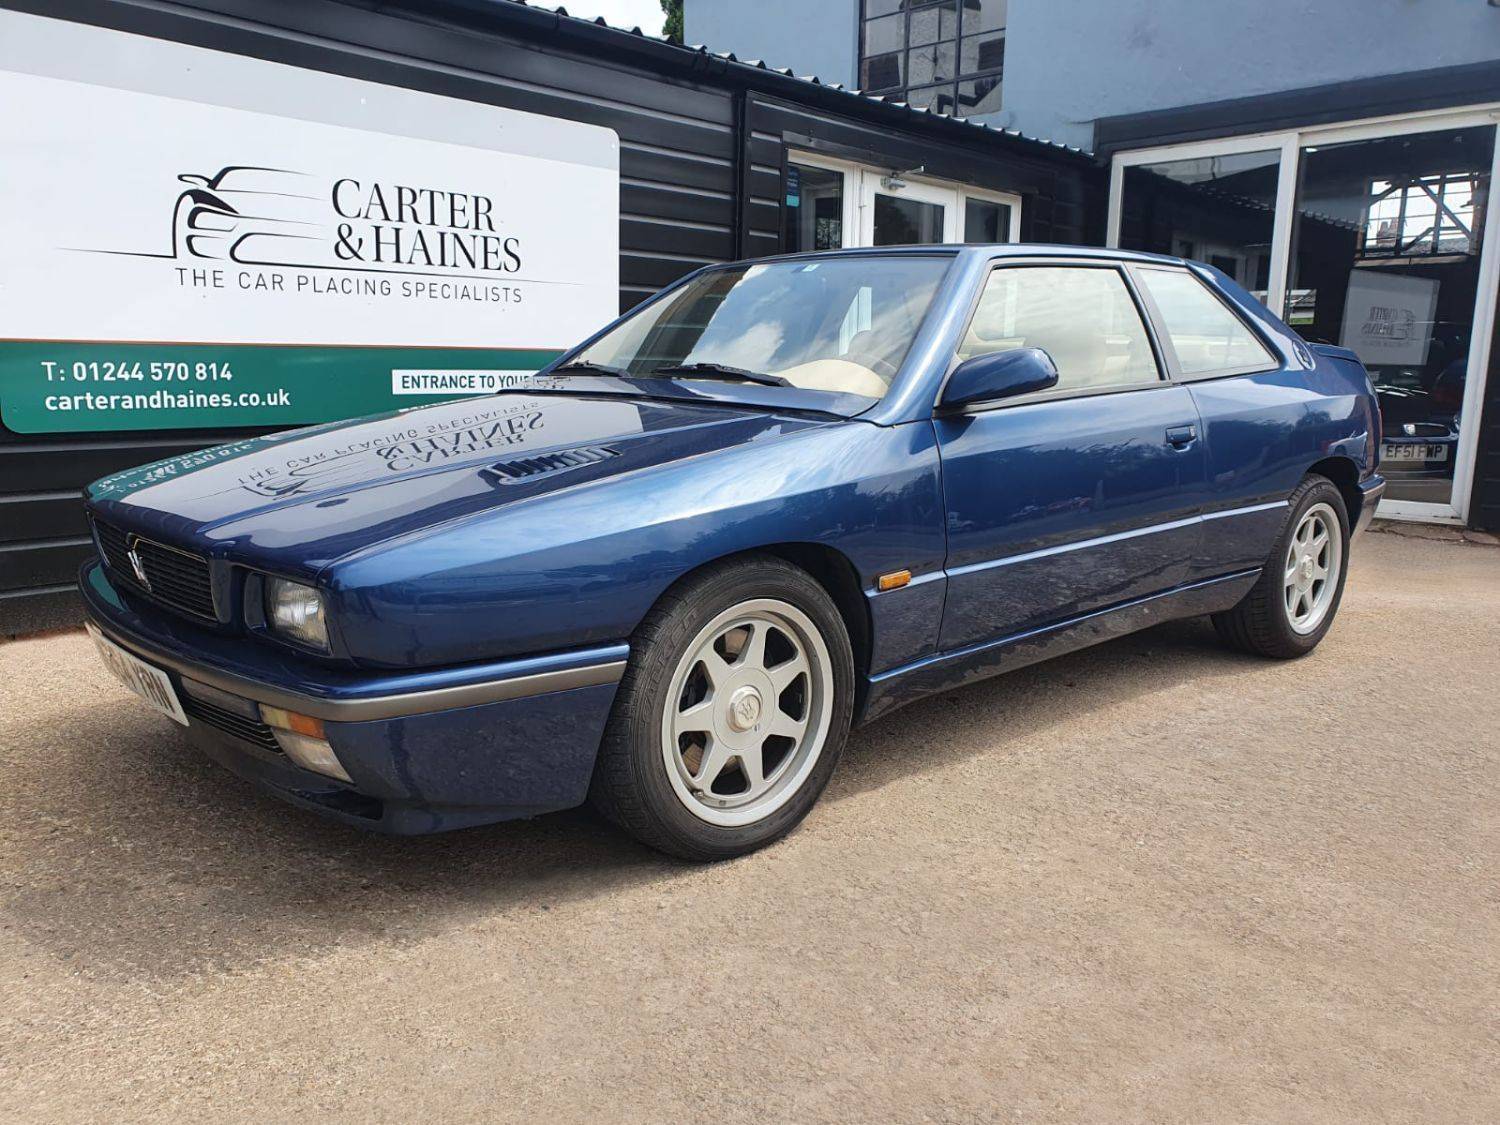 For Sale: Maserati Ghibli 2.8 (1995) offered for GBP 14,995